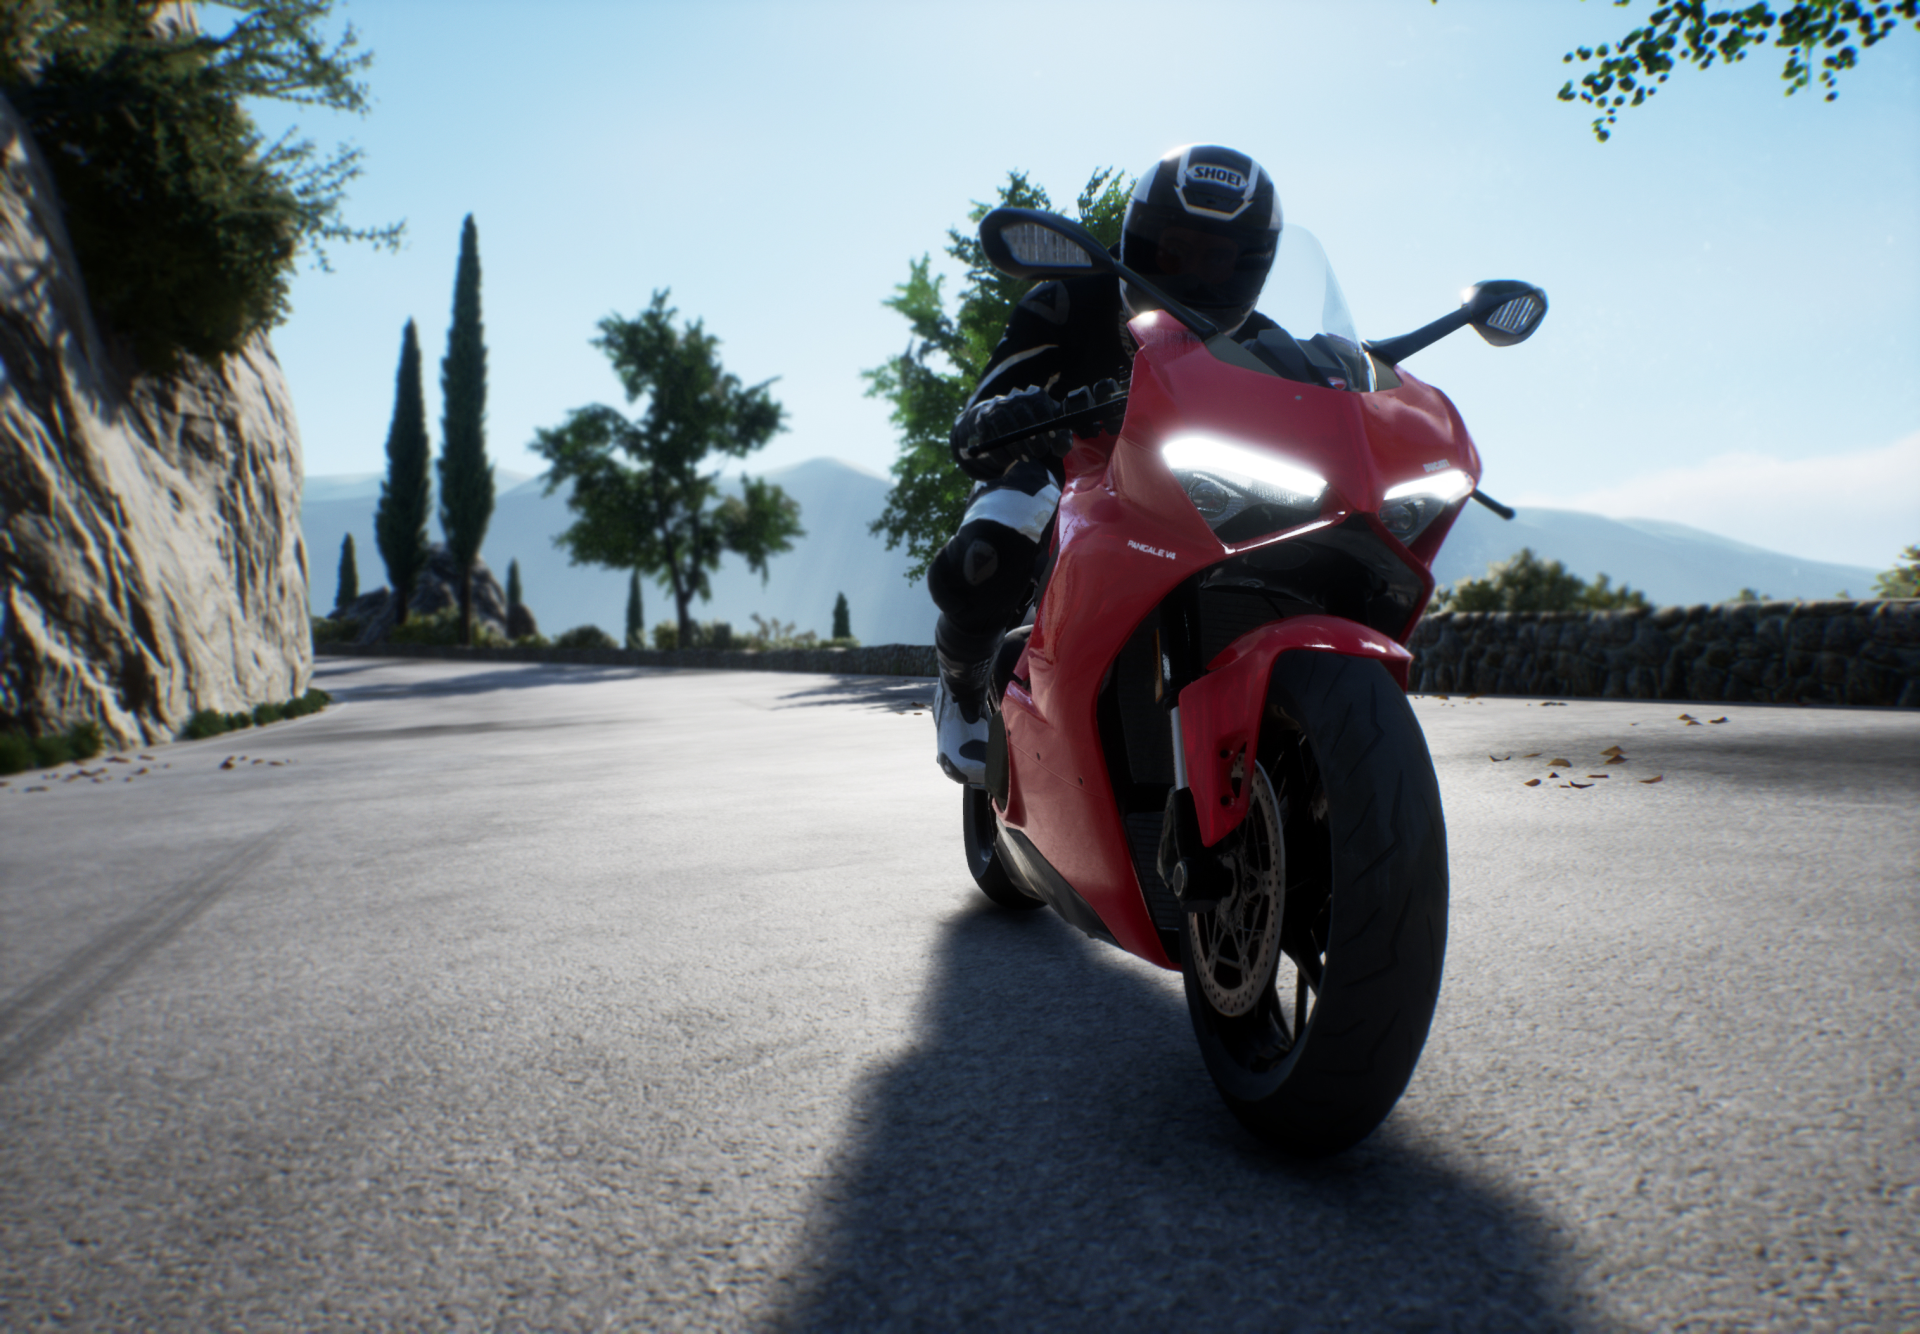 RIDE 3 PS4 Review #26